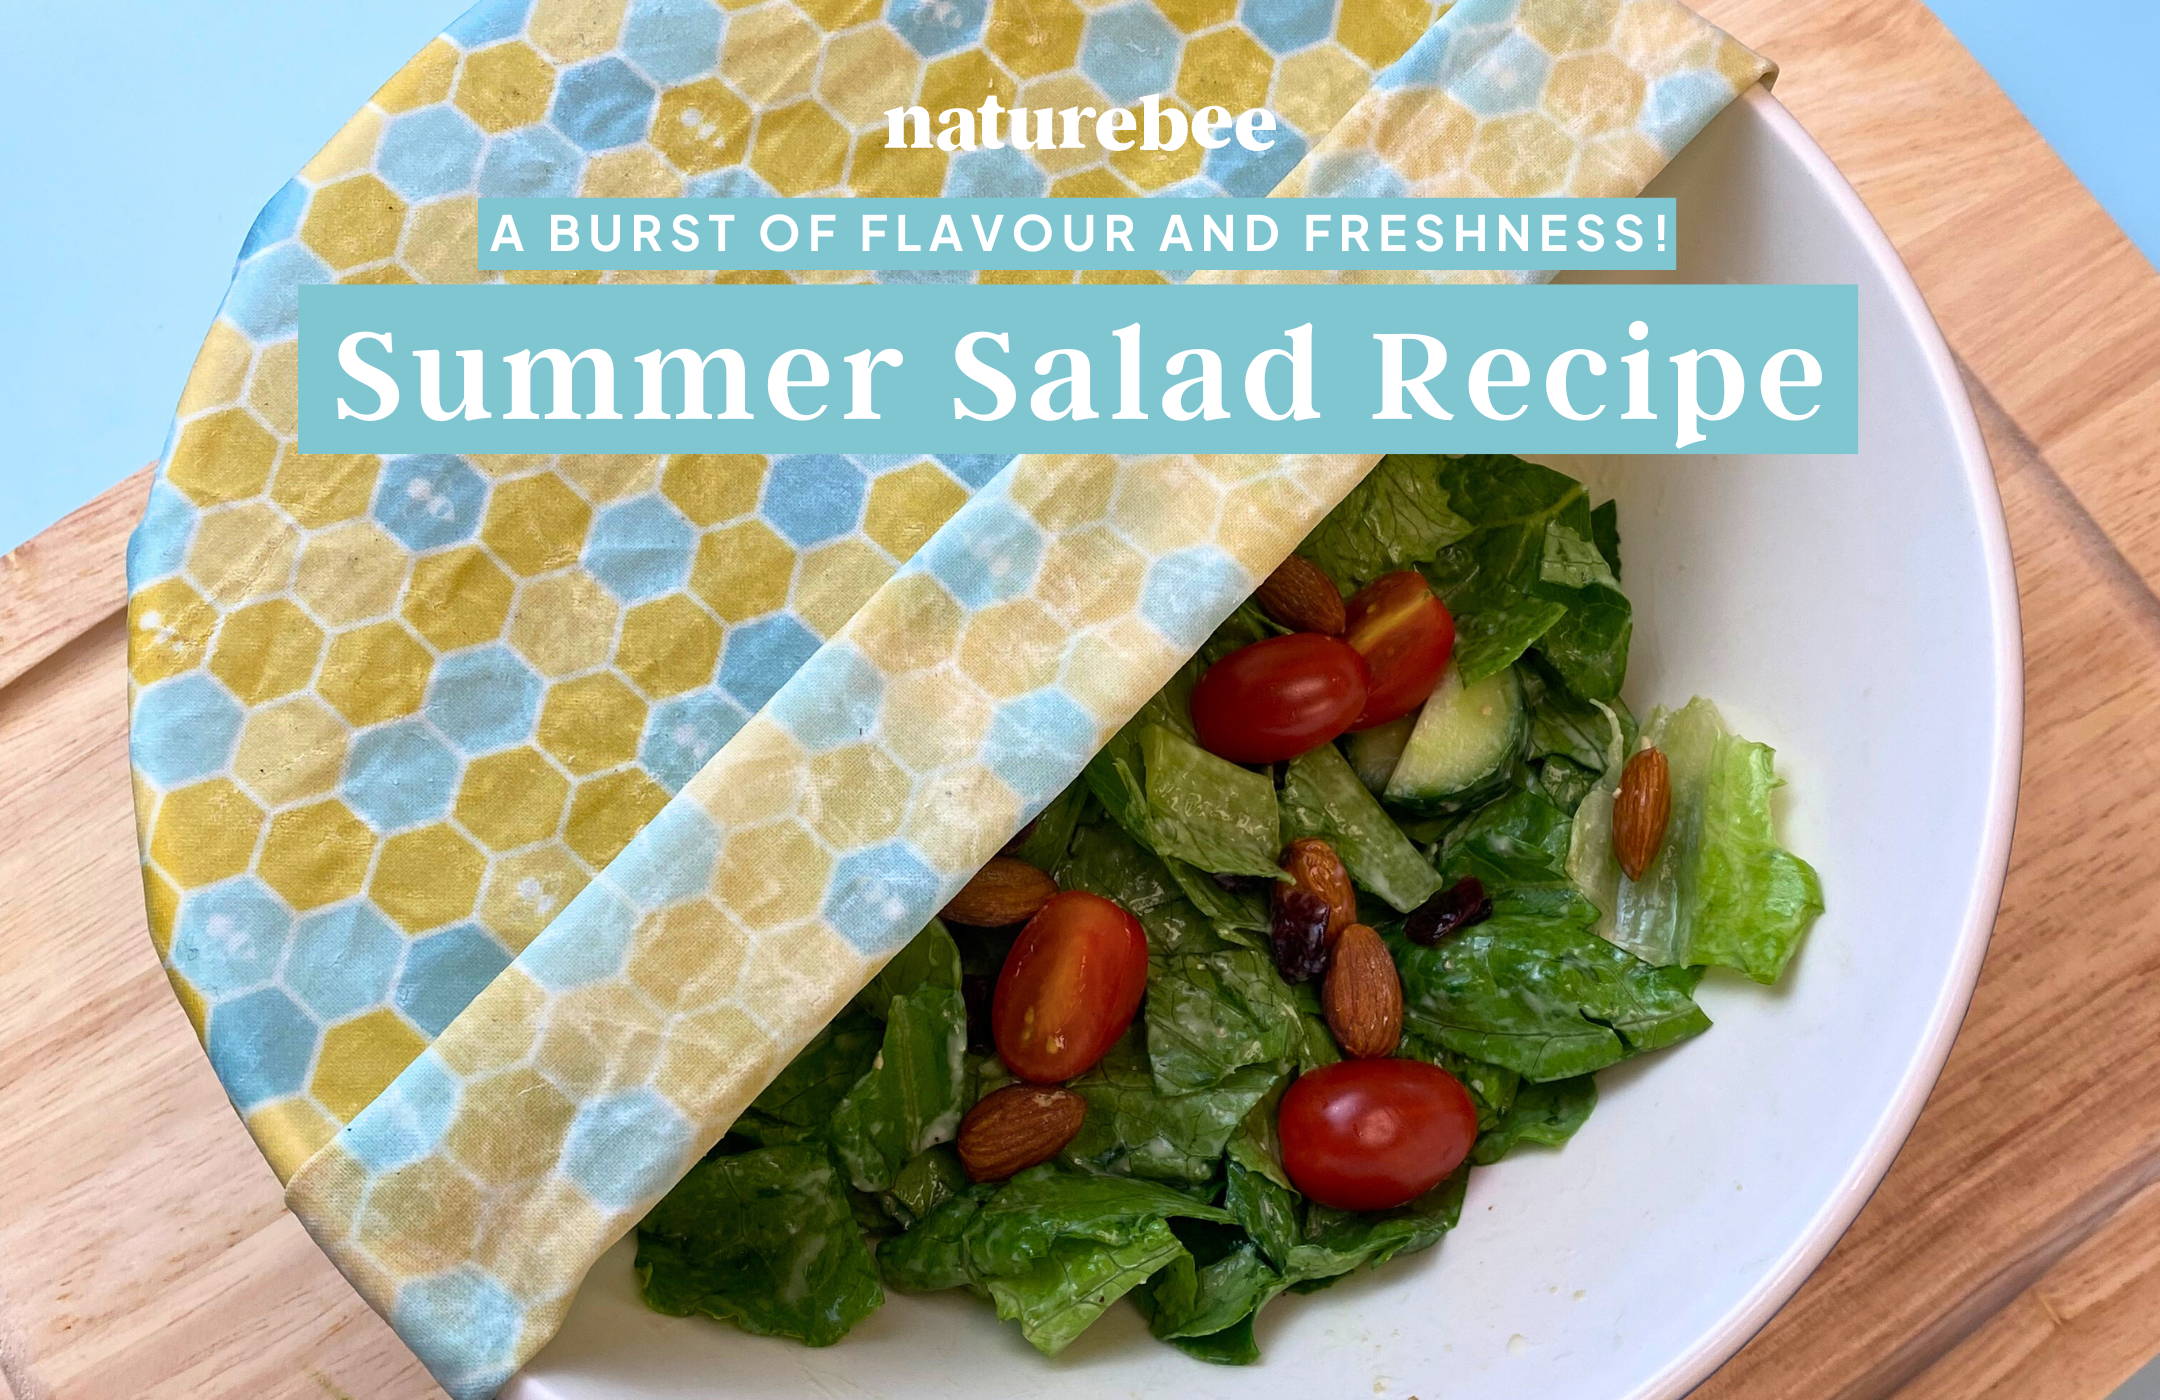 Refreshing Summer Salad Recipe: A Burst of Flavour and Freshness!